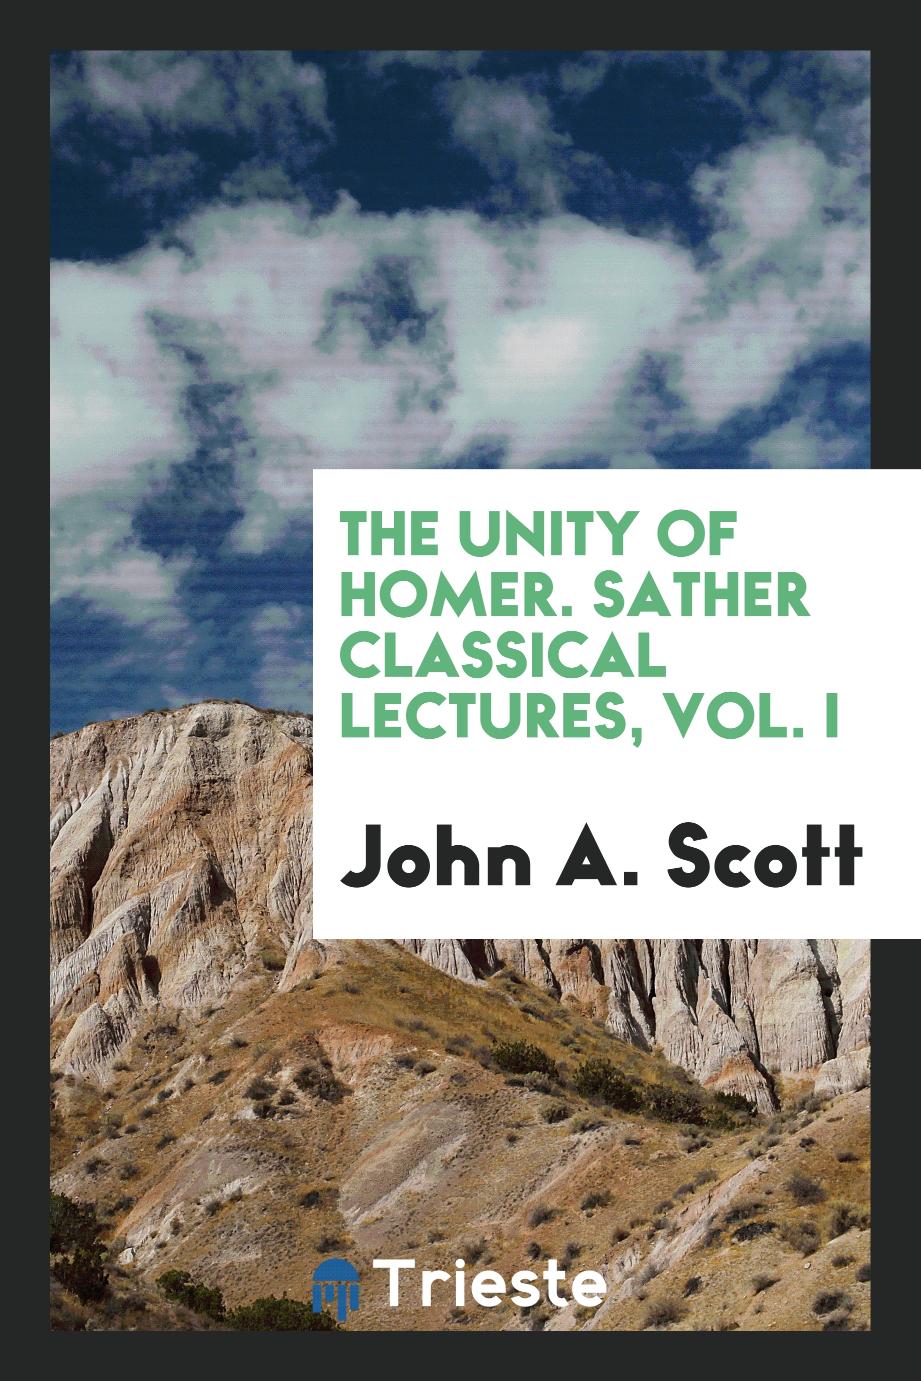 The unity of Homer. Sather classical lectures, Vol. I